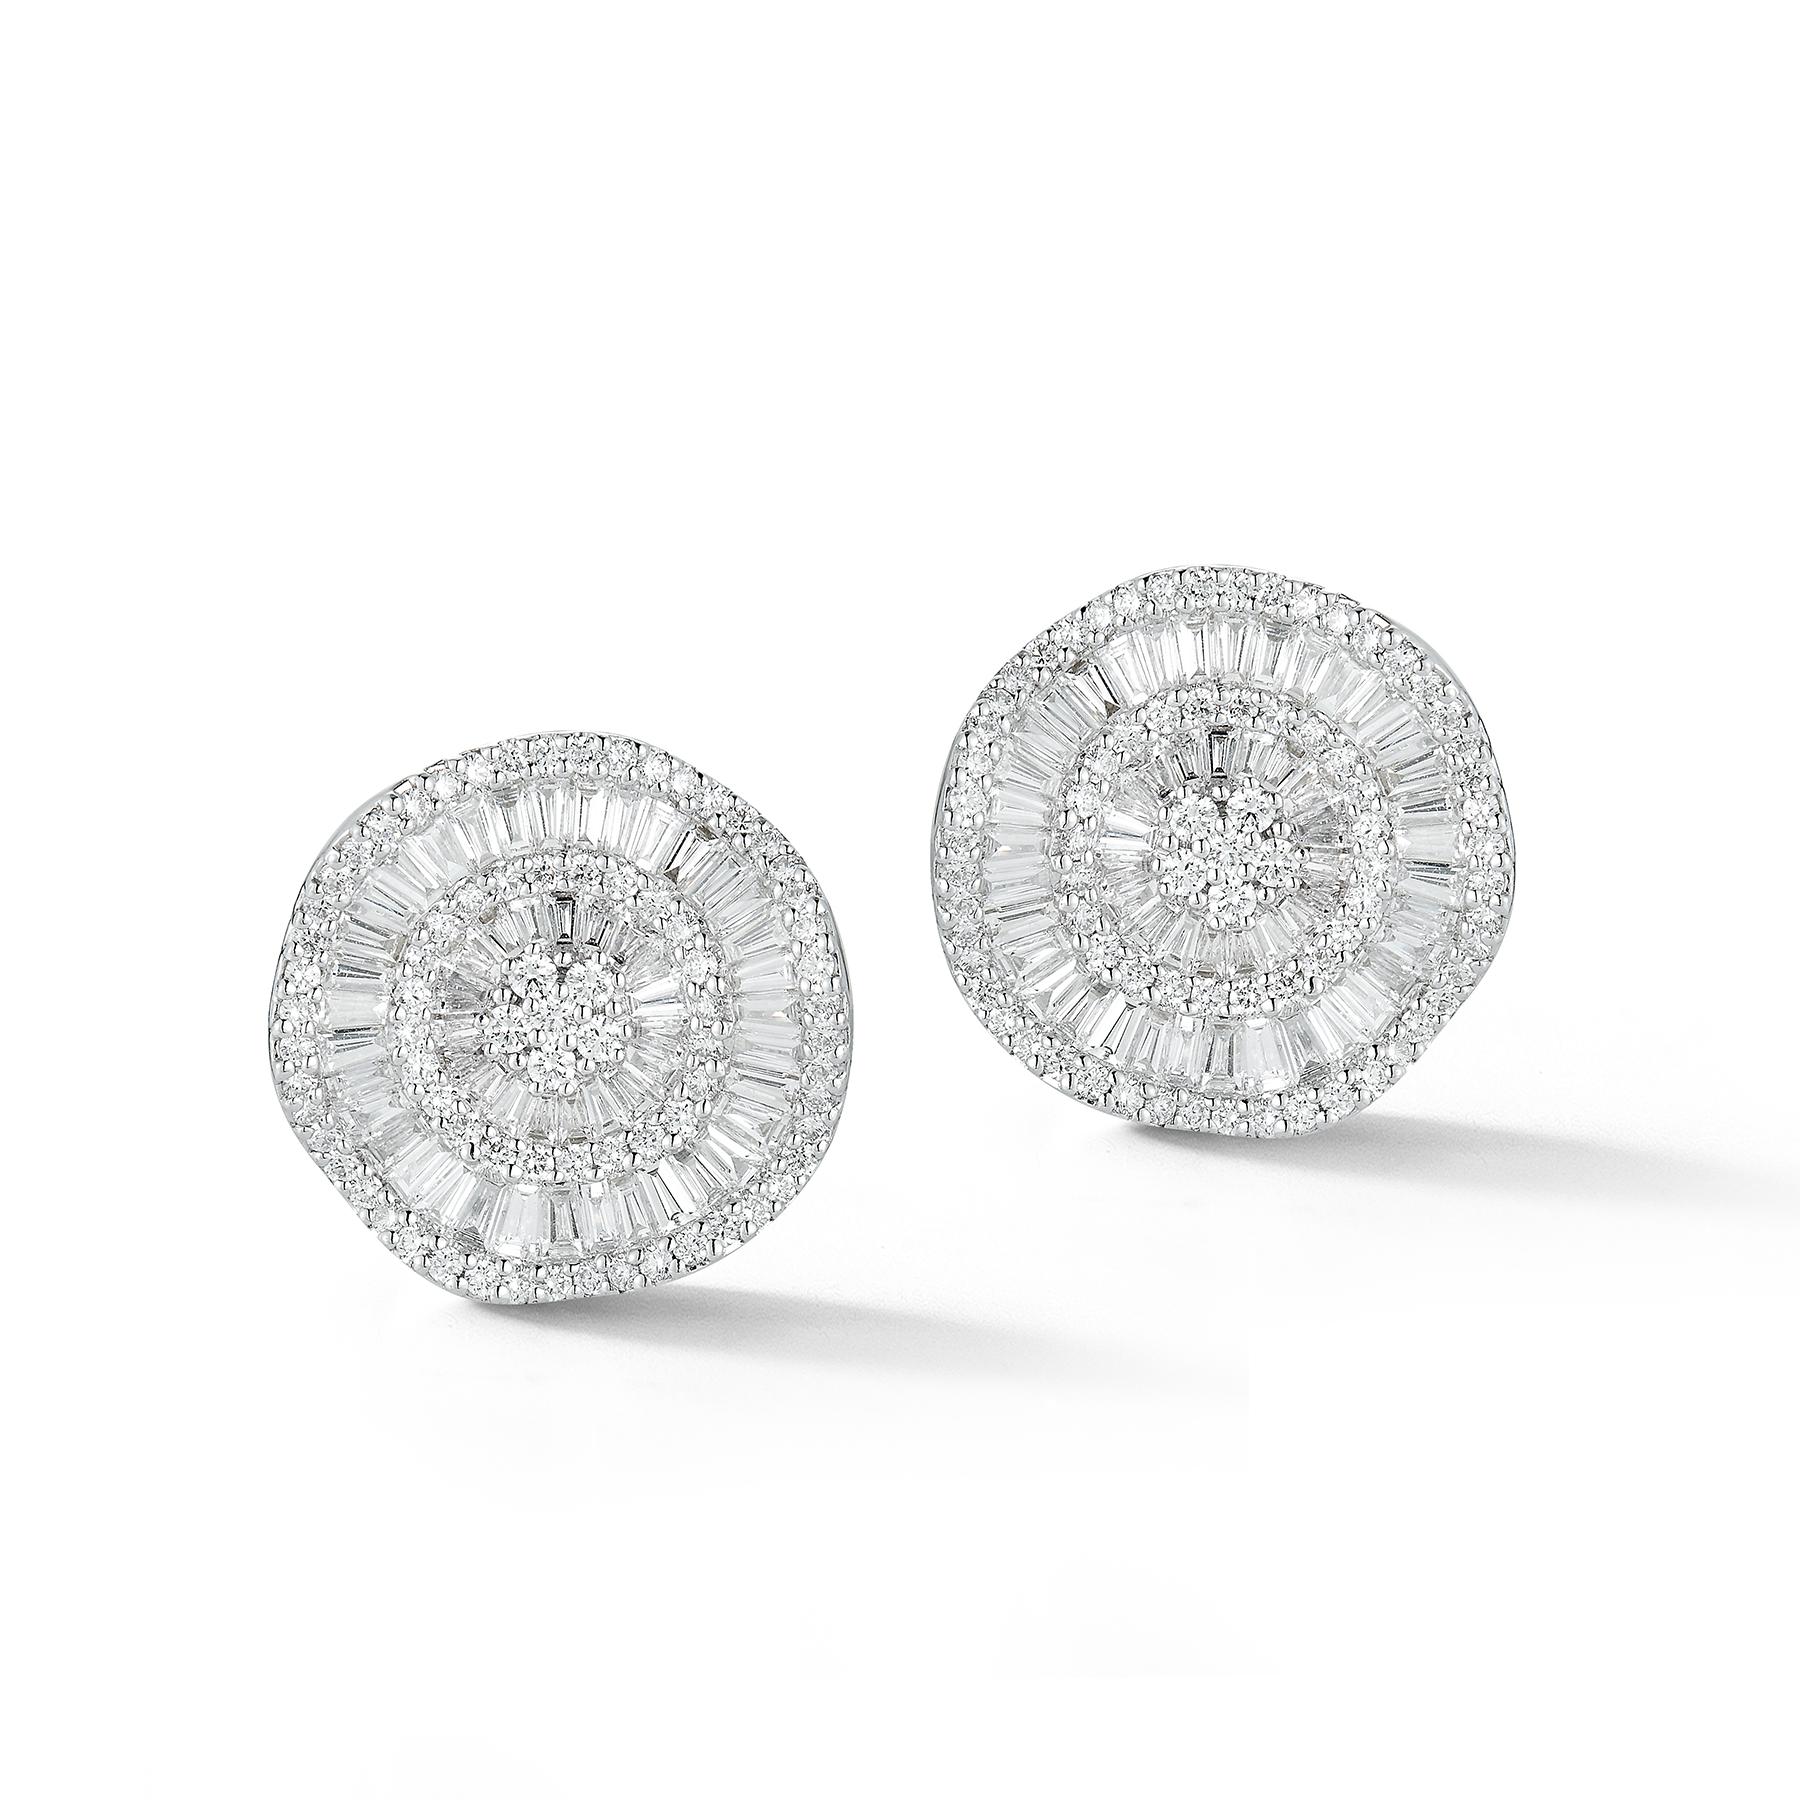 Stunning 18K White Gold Unique Swirl, Button-Design Earrings with 156 Flawless Round Diamonds weighing 1.66 Carats & 108 Flawless Baguette-shaped Diamonds weighing 3.86 Carats. 